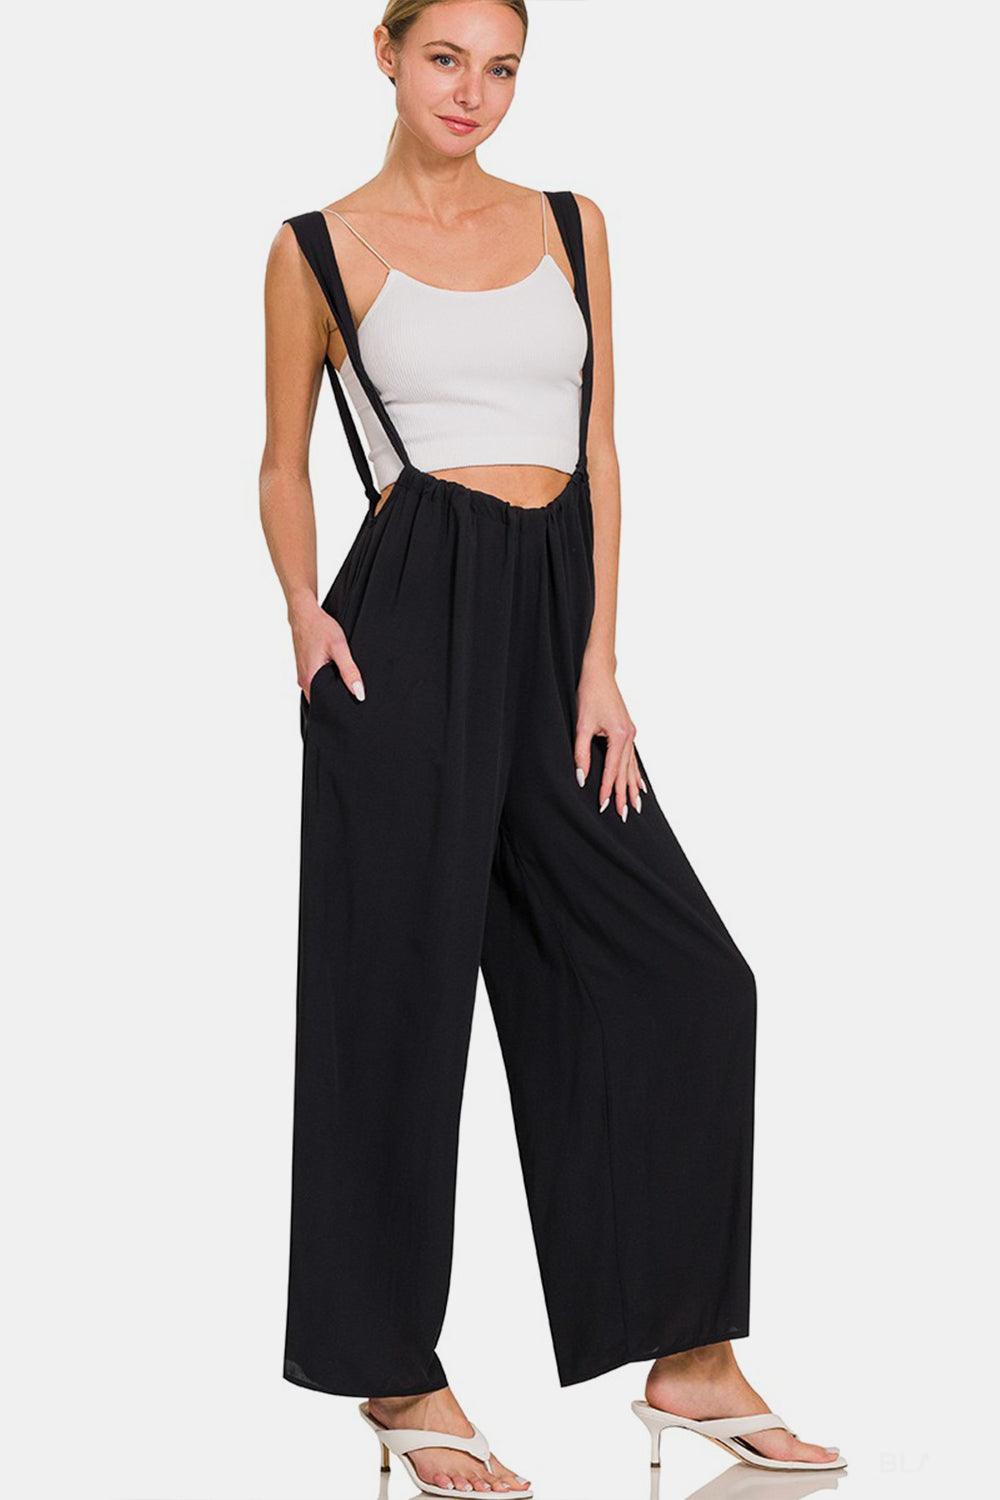 Zenana Tie Back Suspender Jumpsuit with Pockets - AMIClubwear